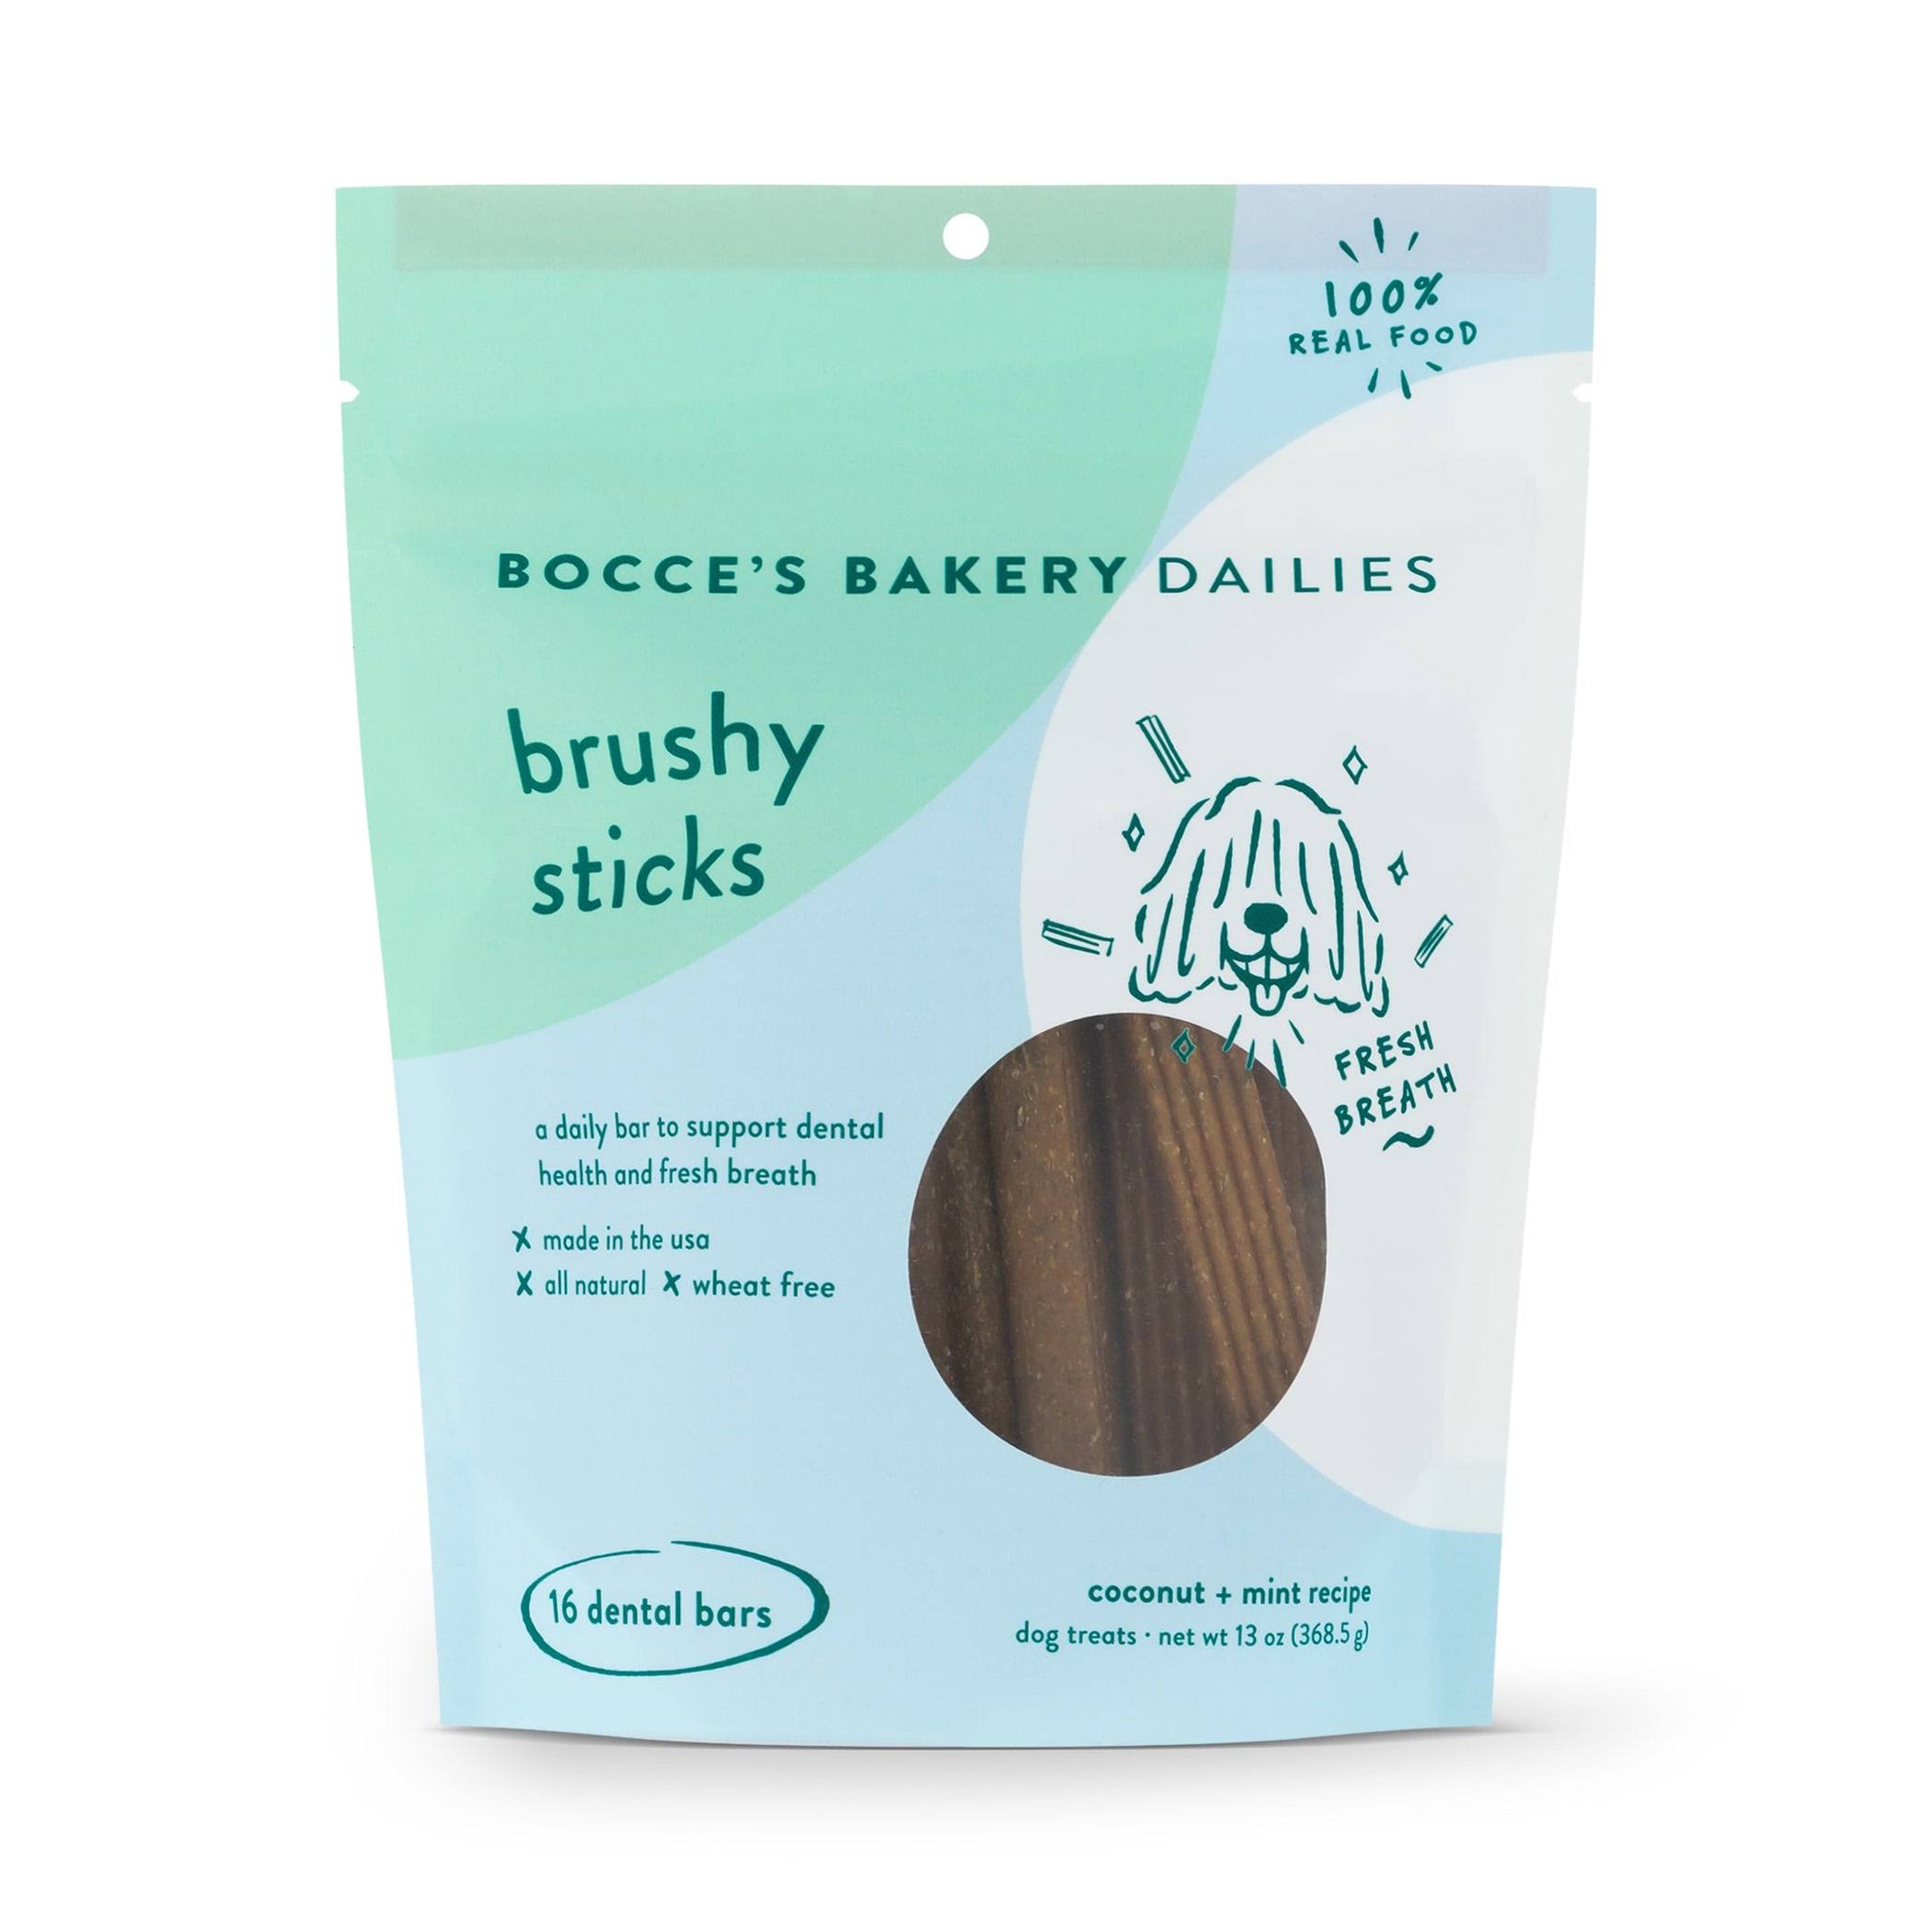 Bocces Bakery Dailies Brushy Sticks To Support Oral Health & Fresh